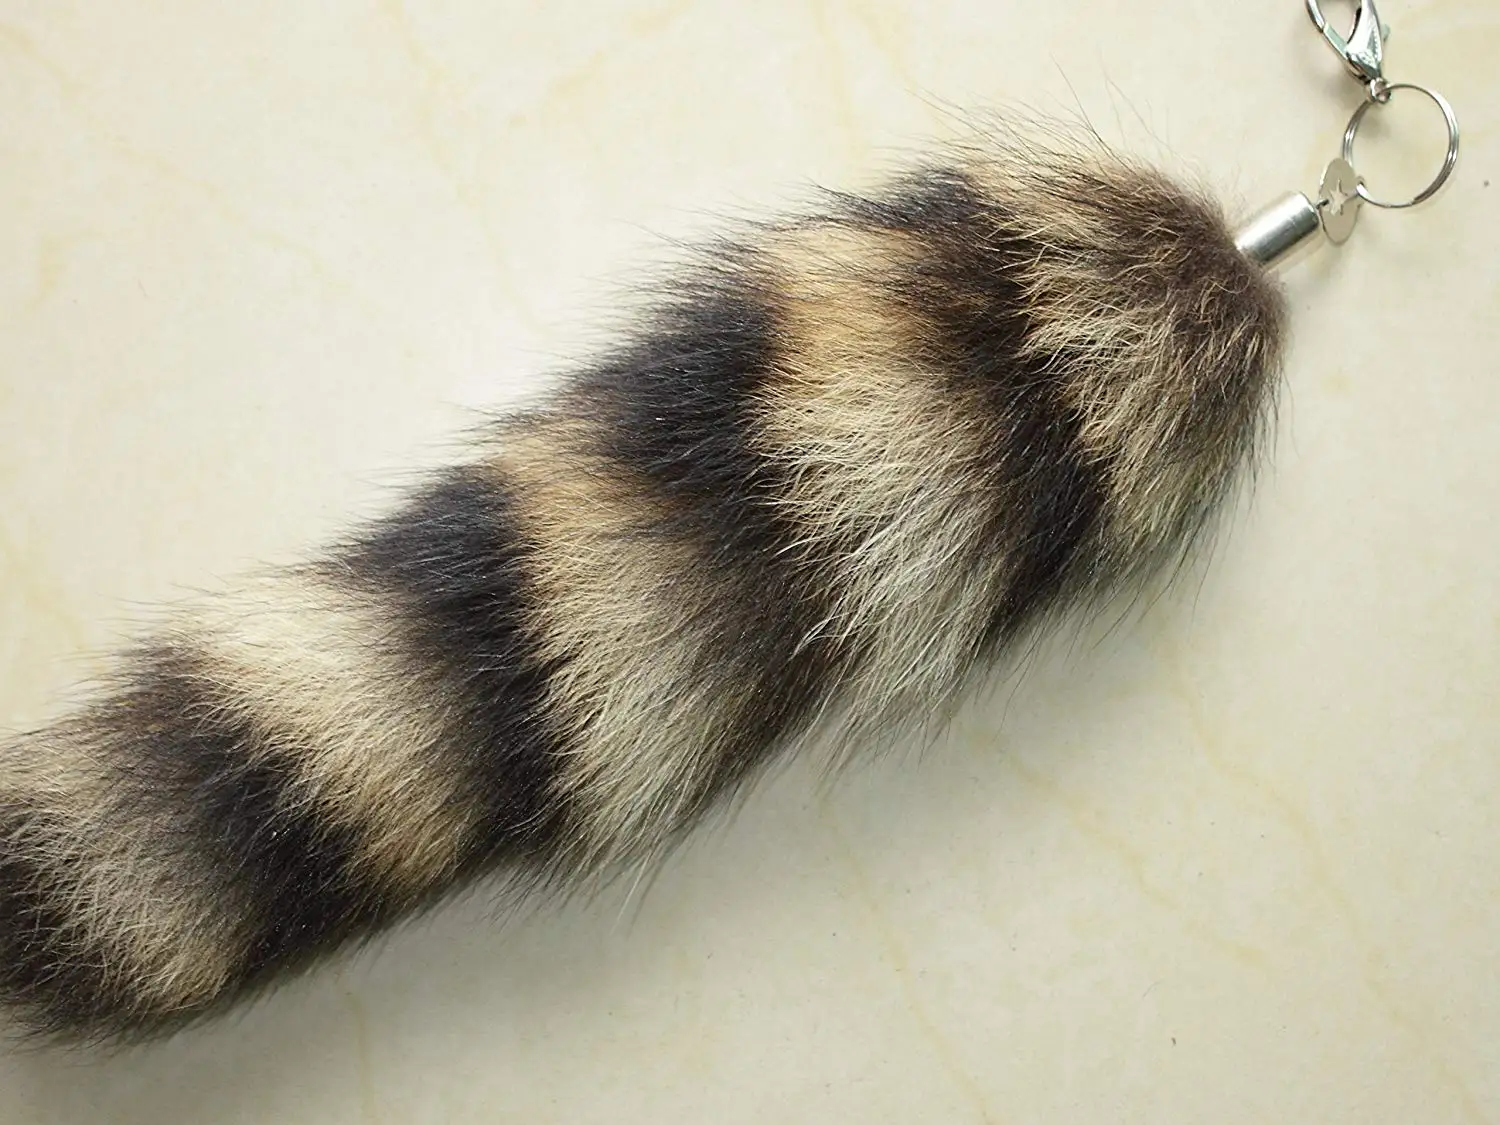 Chunxiao 10 inches Authentic America Raccoon Tail Fur Skin Cosplay Toy Hand...